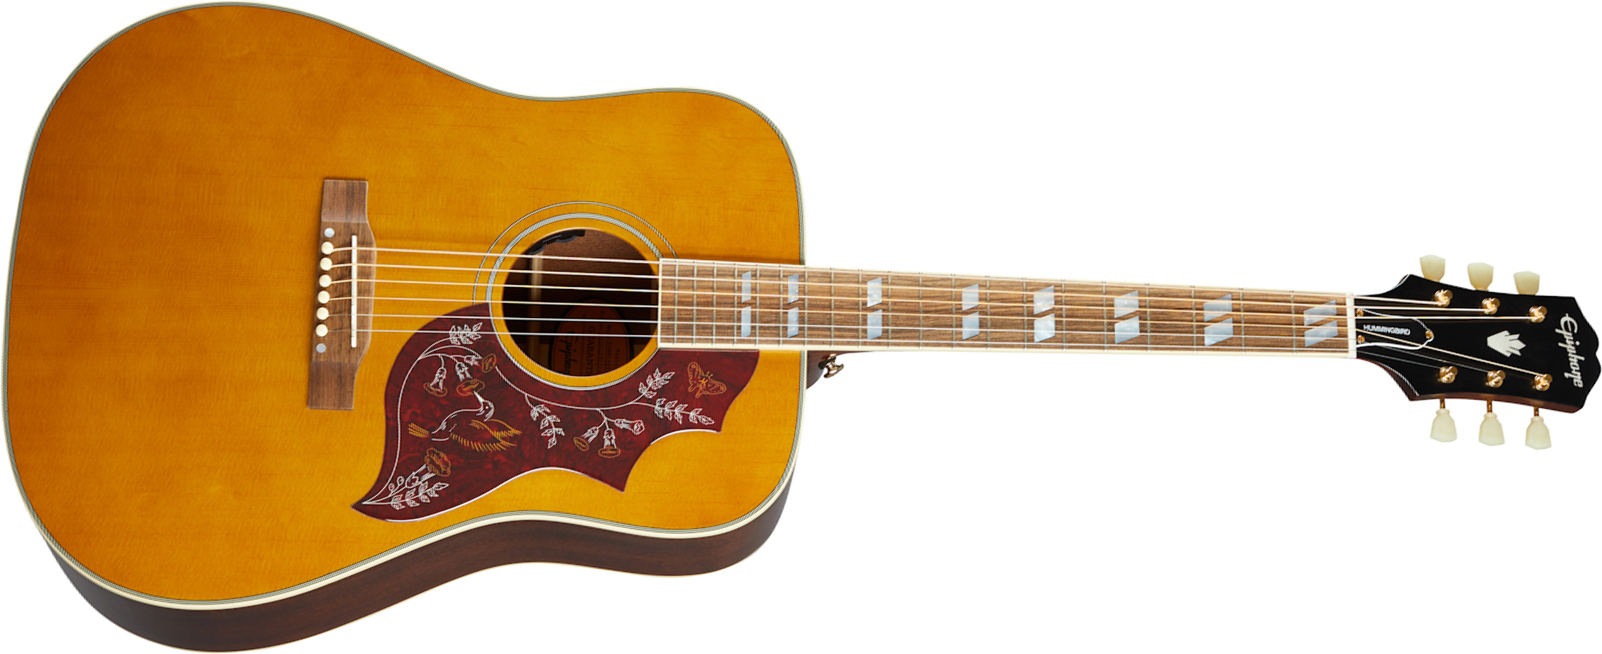 Epiphone Hummingbird Inspired By Gibson Dreadnought Epicea Acajou Lau - Aged Antique Natural - Electro acoustic guitar - Main picture